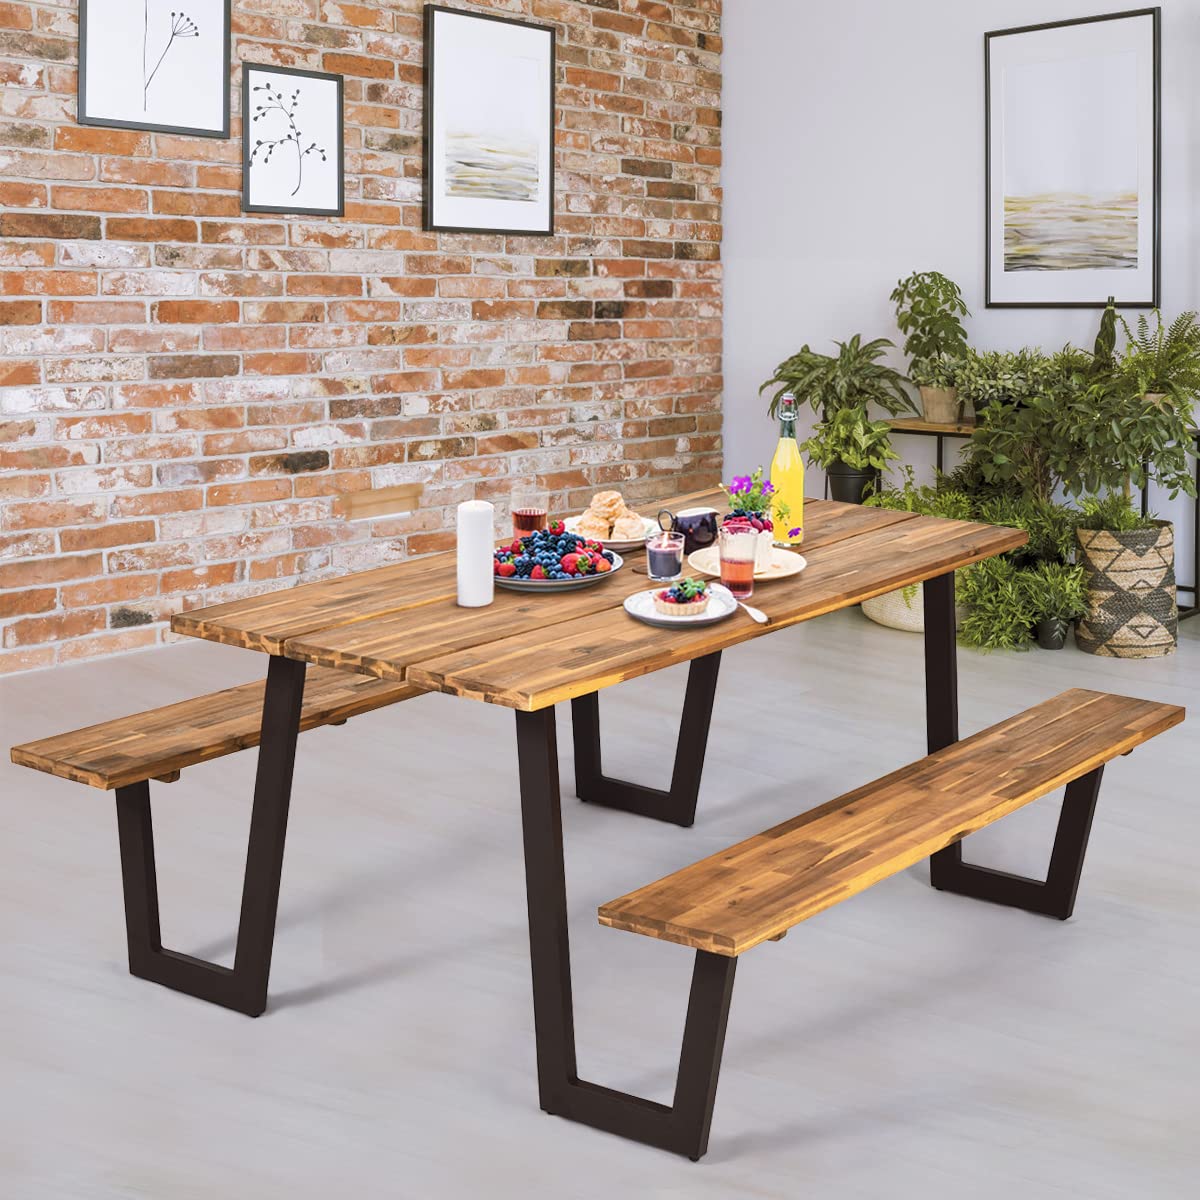 Giantex Picnic Table Bench Set for 6 or 8